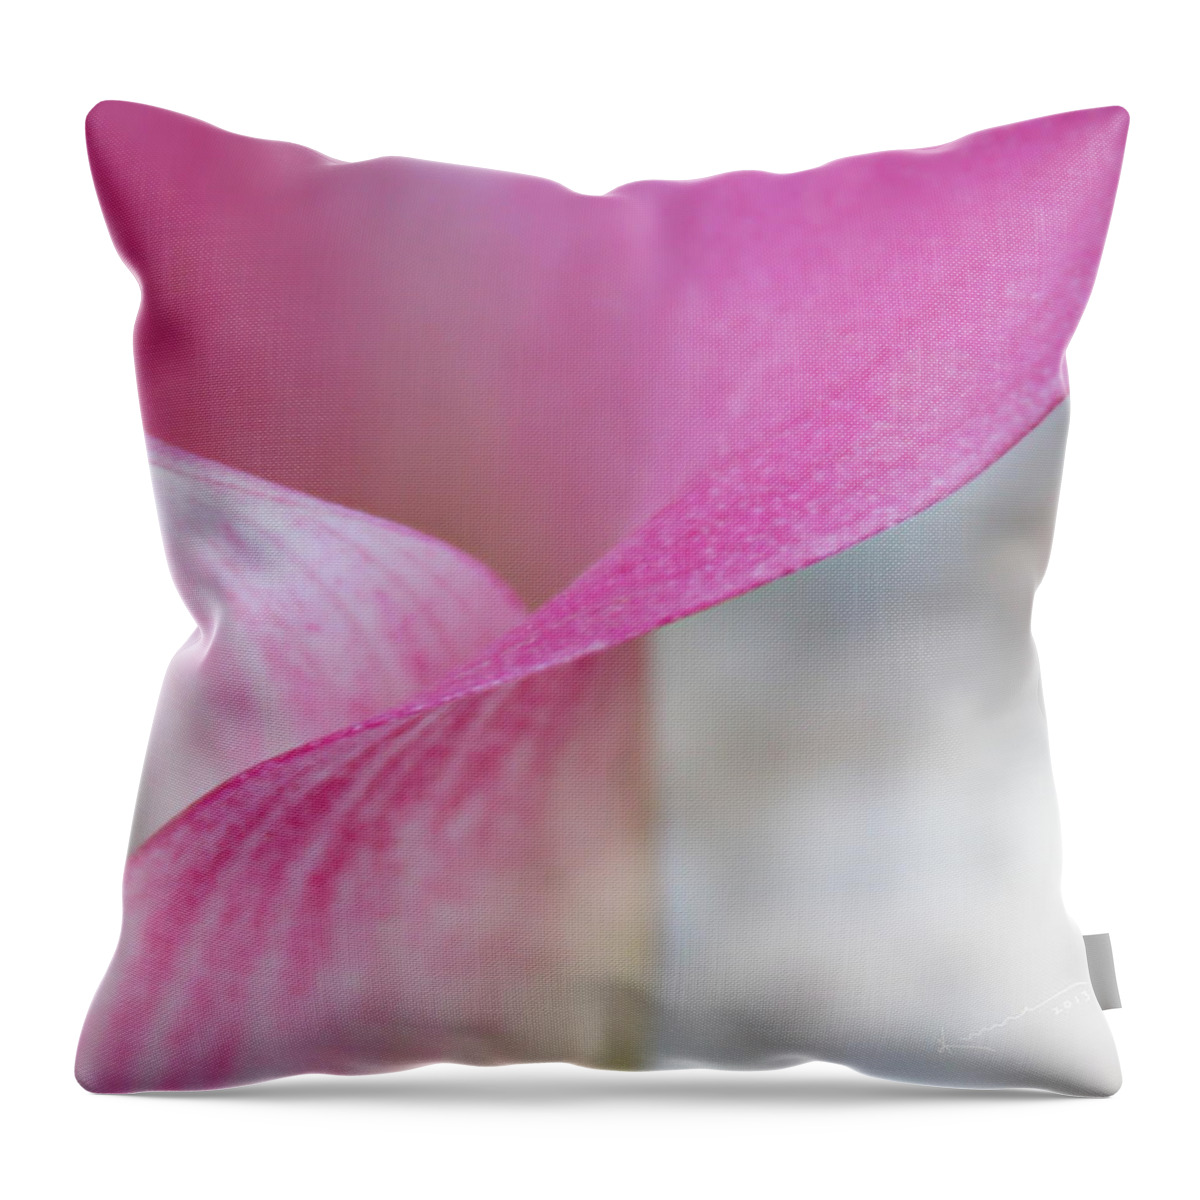 Delicate Lily Throw Pillow featuring the photograph Delicate Curves by Kume Bryant